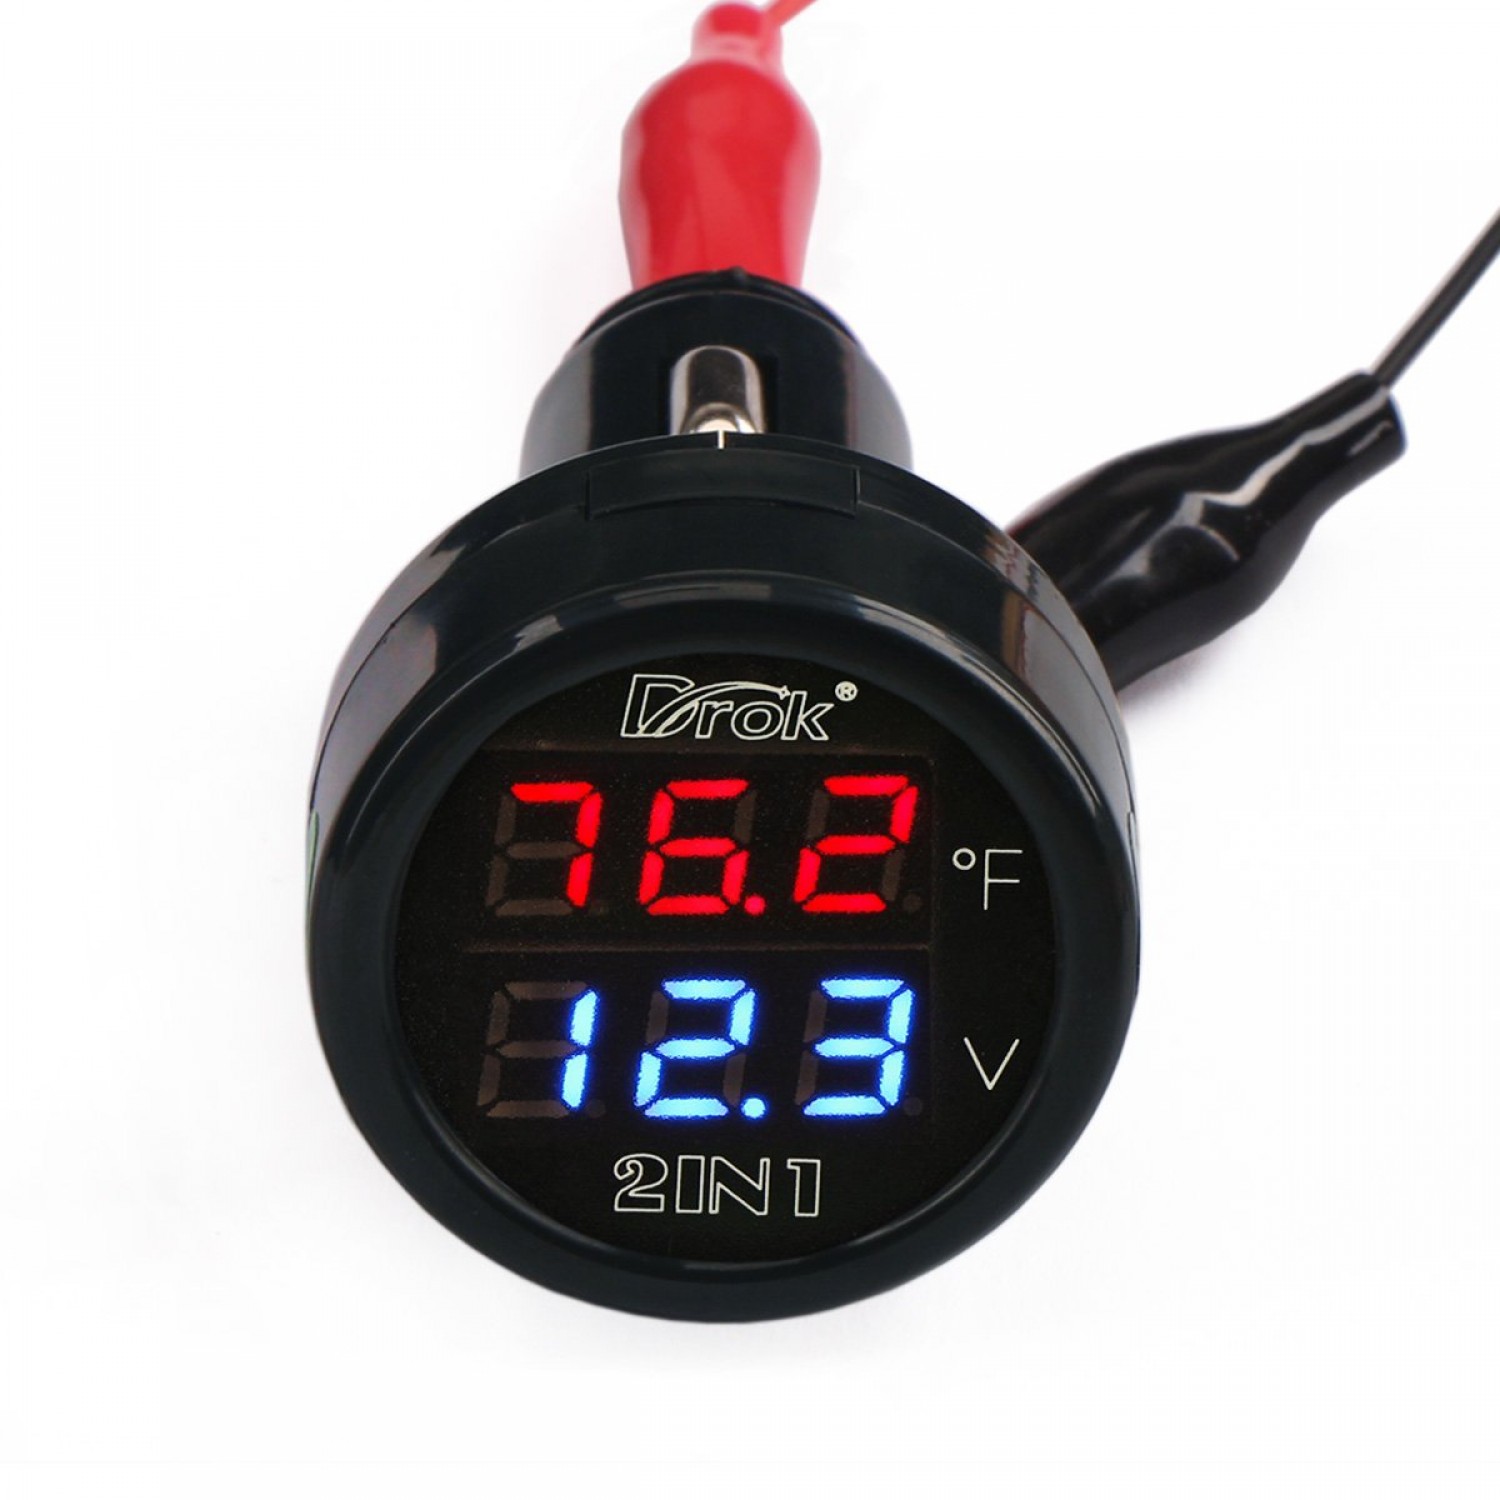 Car Volage Monitor Battery Voltmeter Thermometer 10-170 Degree